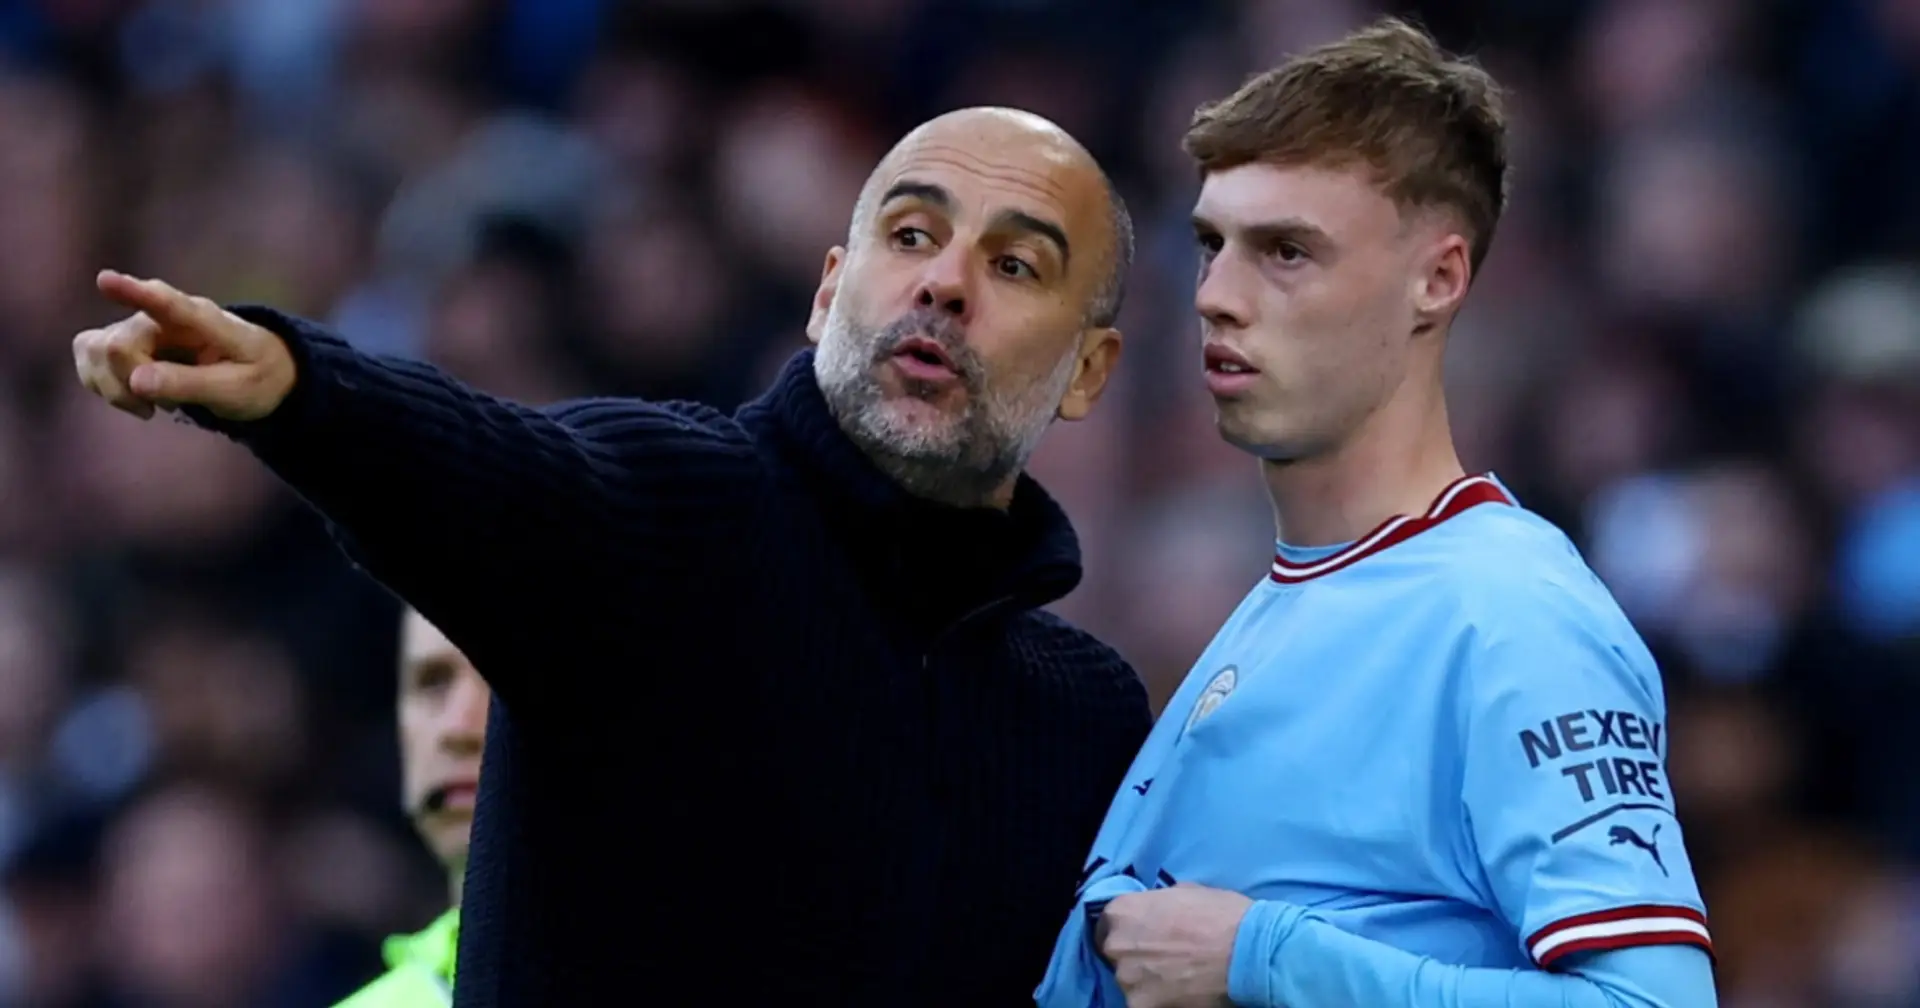 'He was asking for two seasons': Guardiola reveals why he agreed to Palmer transfer